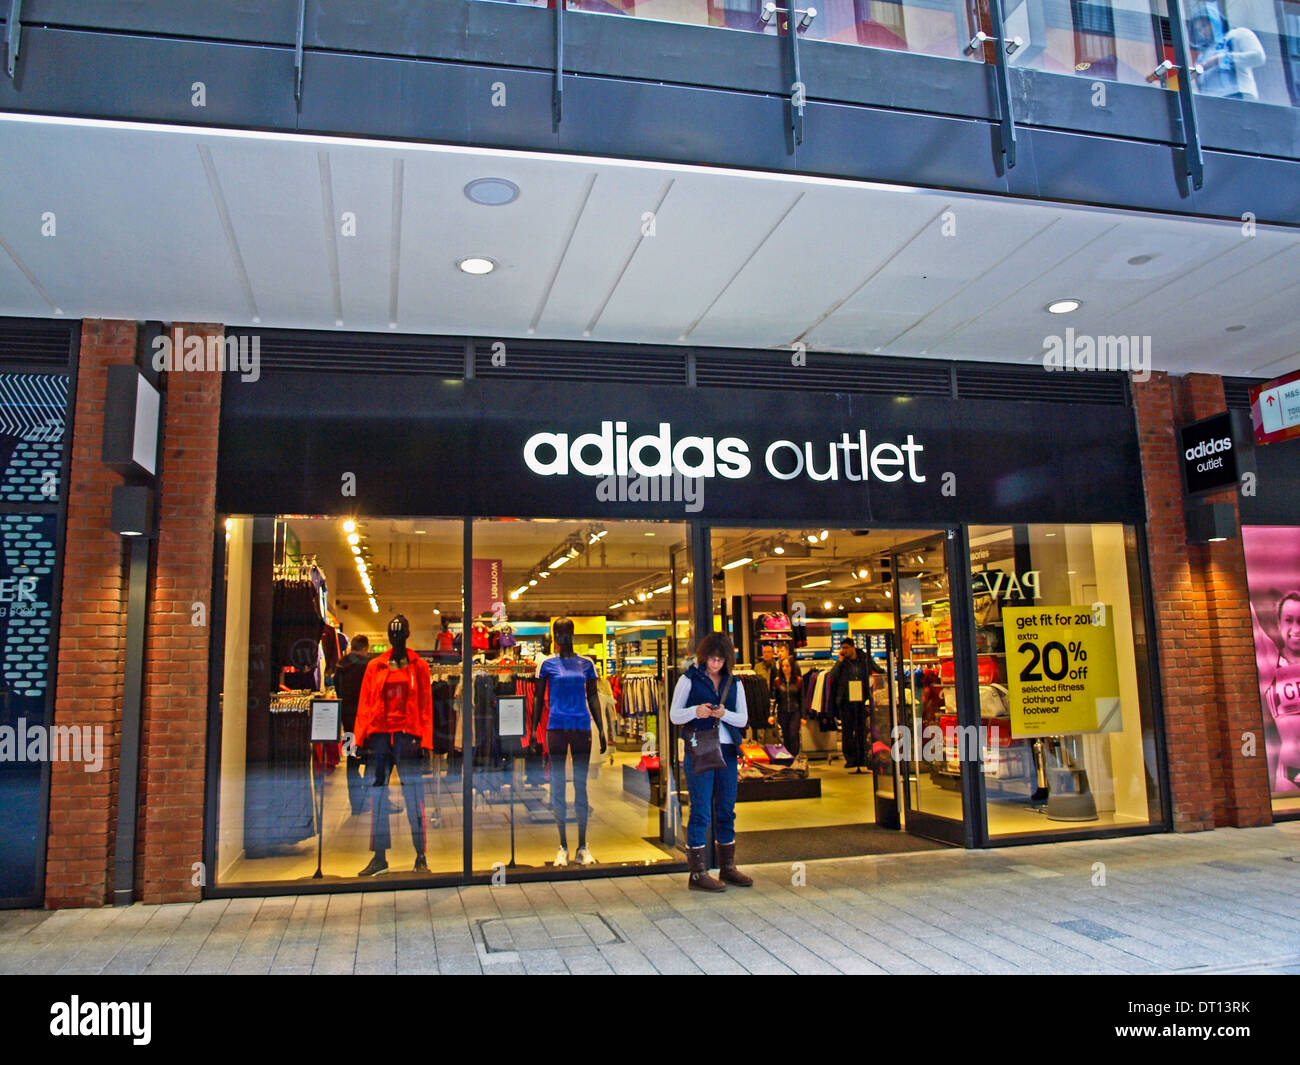 adidas outlet surrey